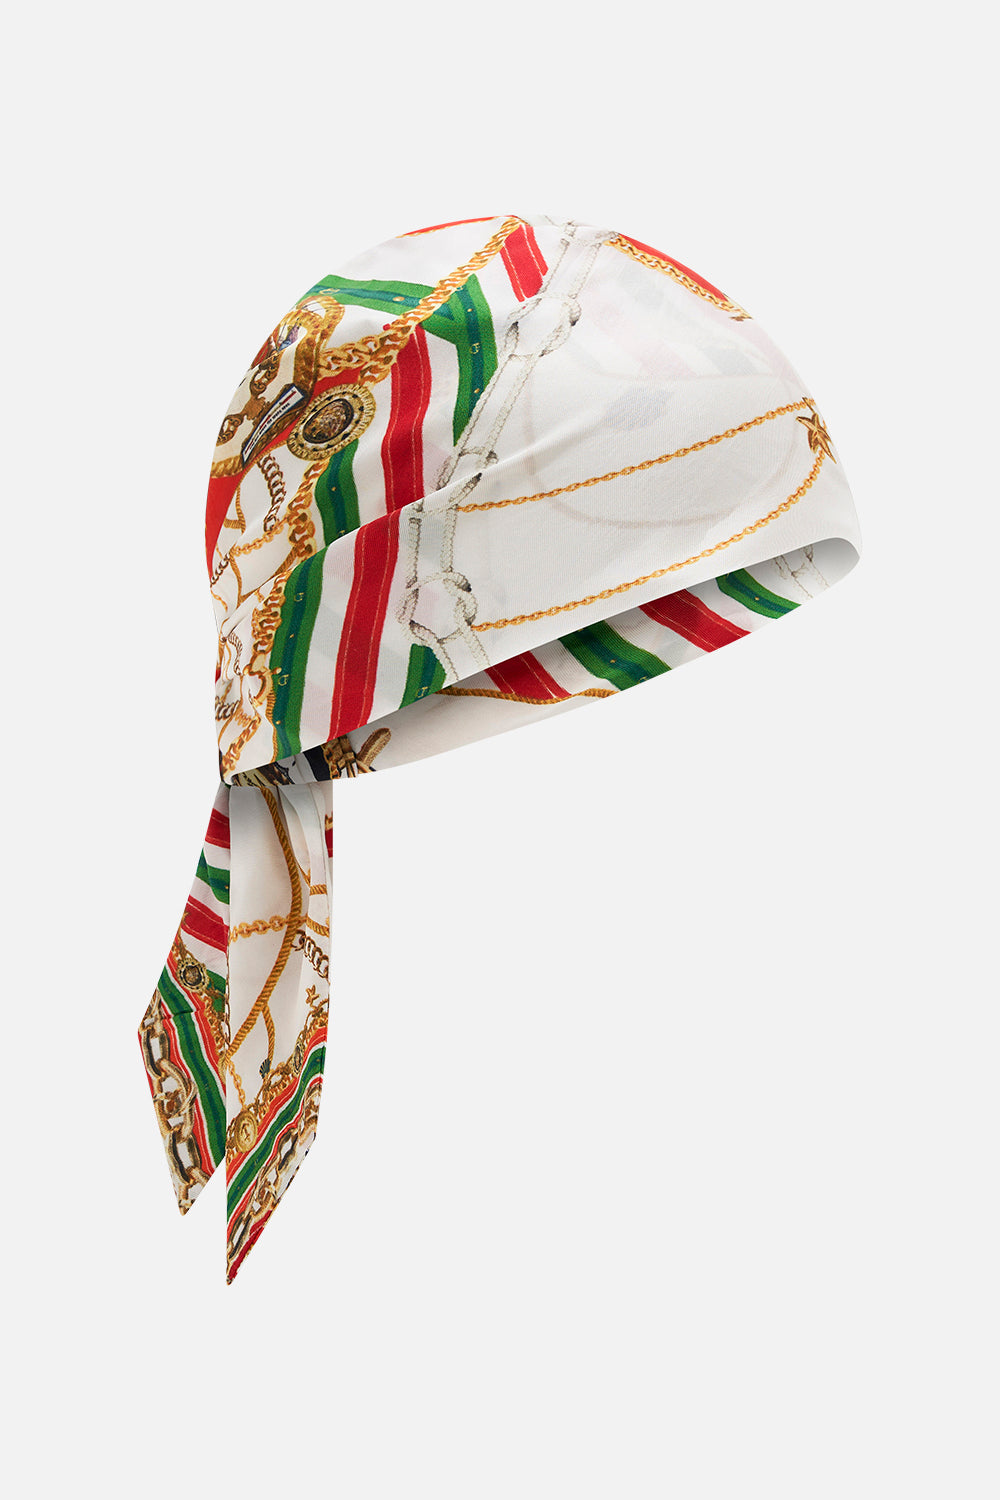 Product view of CAMILLA silk headscarf in Saluti Summertime print